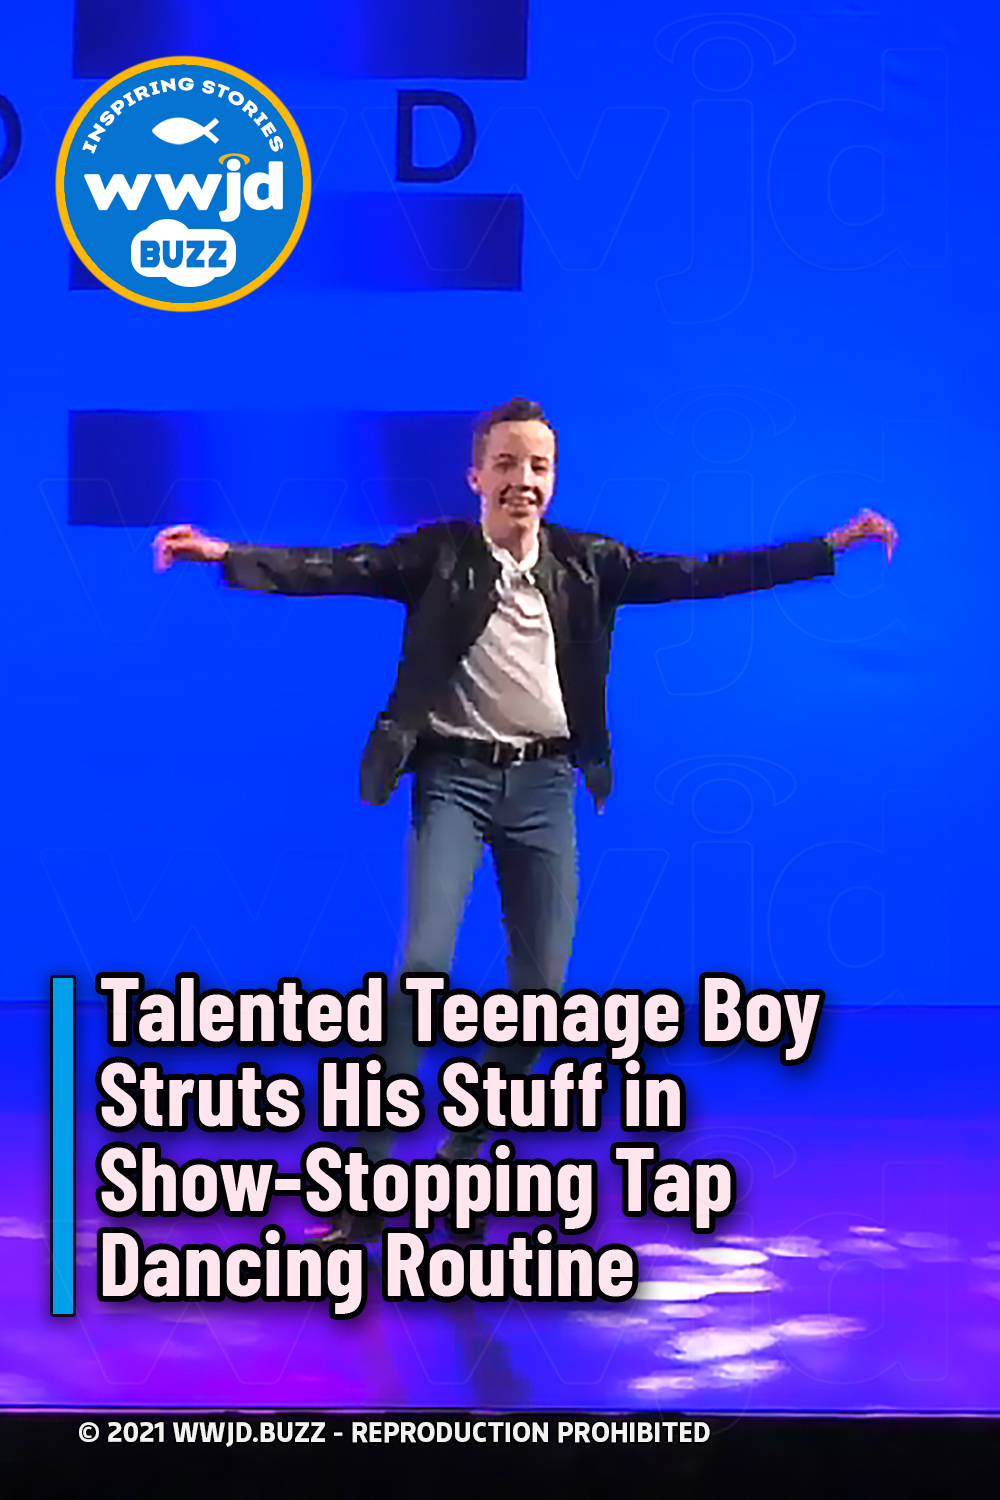 Talented Teenage Boy Struts His Stuff in Show-Stopping Tap Dancing Routine